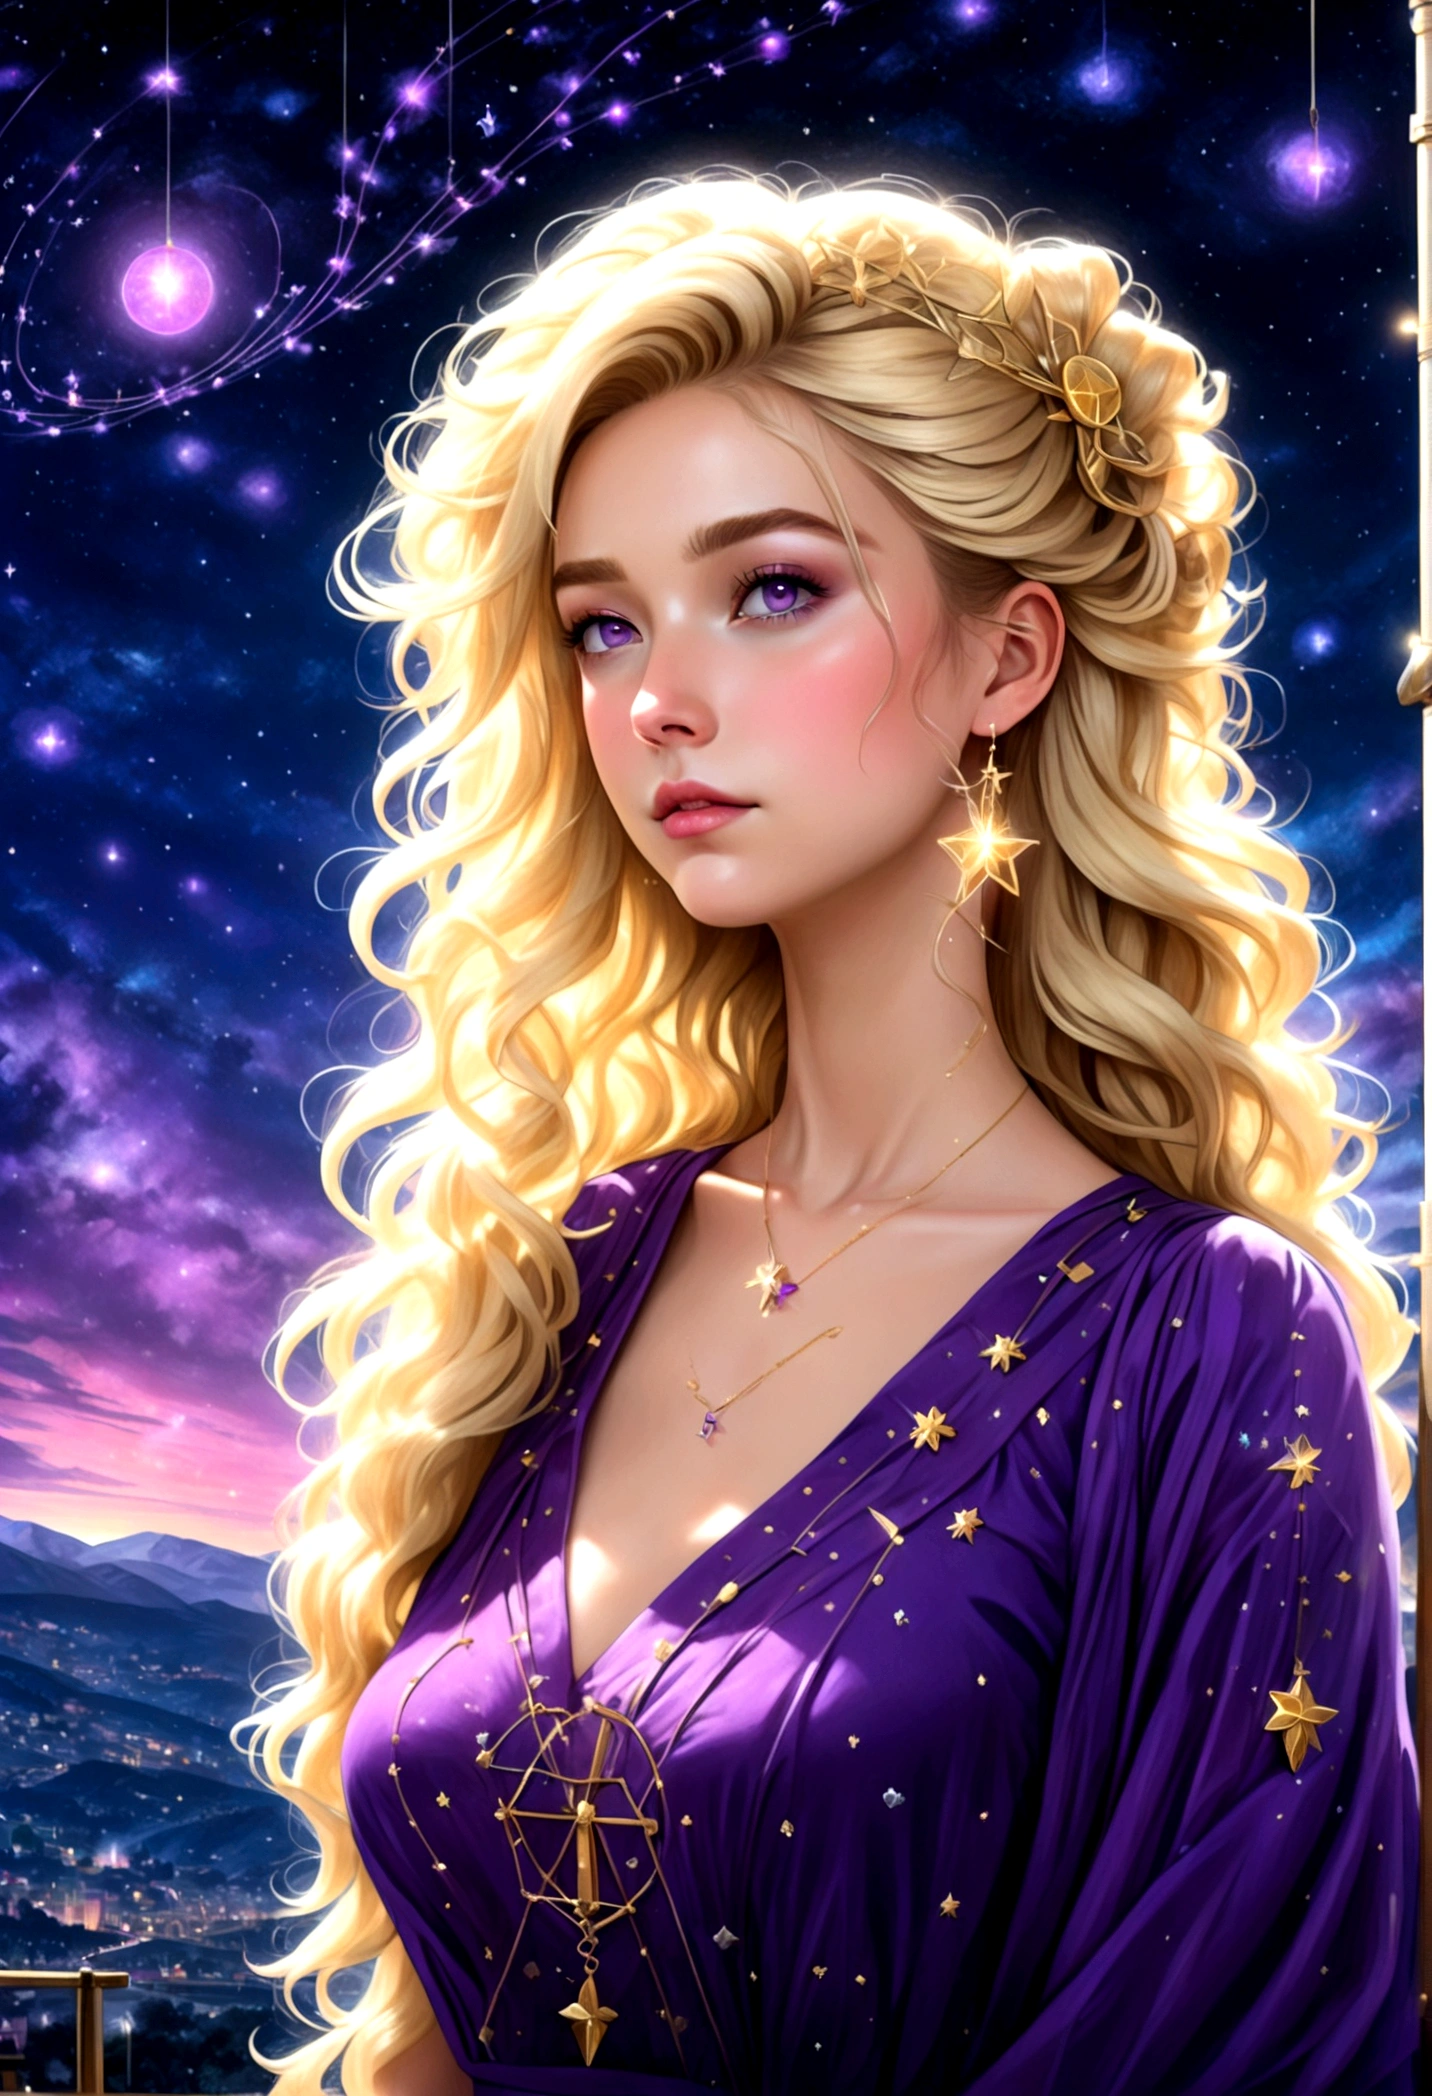 a portrait of an astrologer looking to the sky at libra constellation in the night sky, an extraordinary beautiful woman, there is magic in her eyes divining the future from the Libra constellation, blond hair, dynamic hair style, (best detailed face: 1.5), wearing an intricate dark purple dress decorated with glowing stars, she looks to the night sky seeing the ((Libra constellation in the sky: 1.5)), vibrant, Ultra-high resolution, High Contrast, (masterpiece:1.5), highest quality, Best aesthetics), best details, best quality, highres, 16k, [ultra detailed], masterpiece, best quality, (extremely detailed), Cinematic Hollywood Film, magical sky, FireMagicAI, dark novel